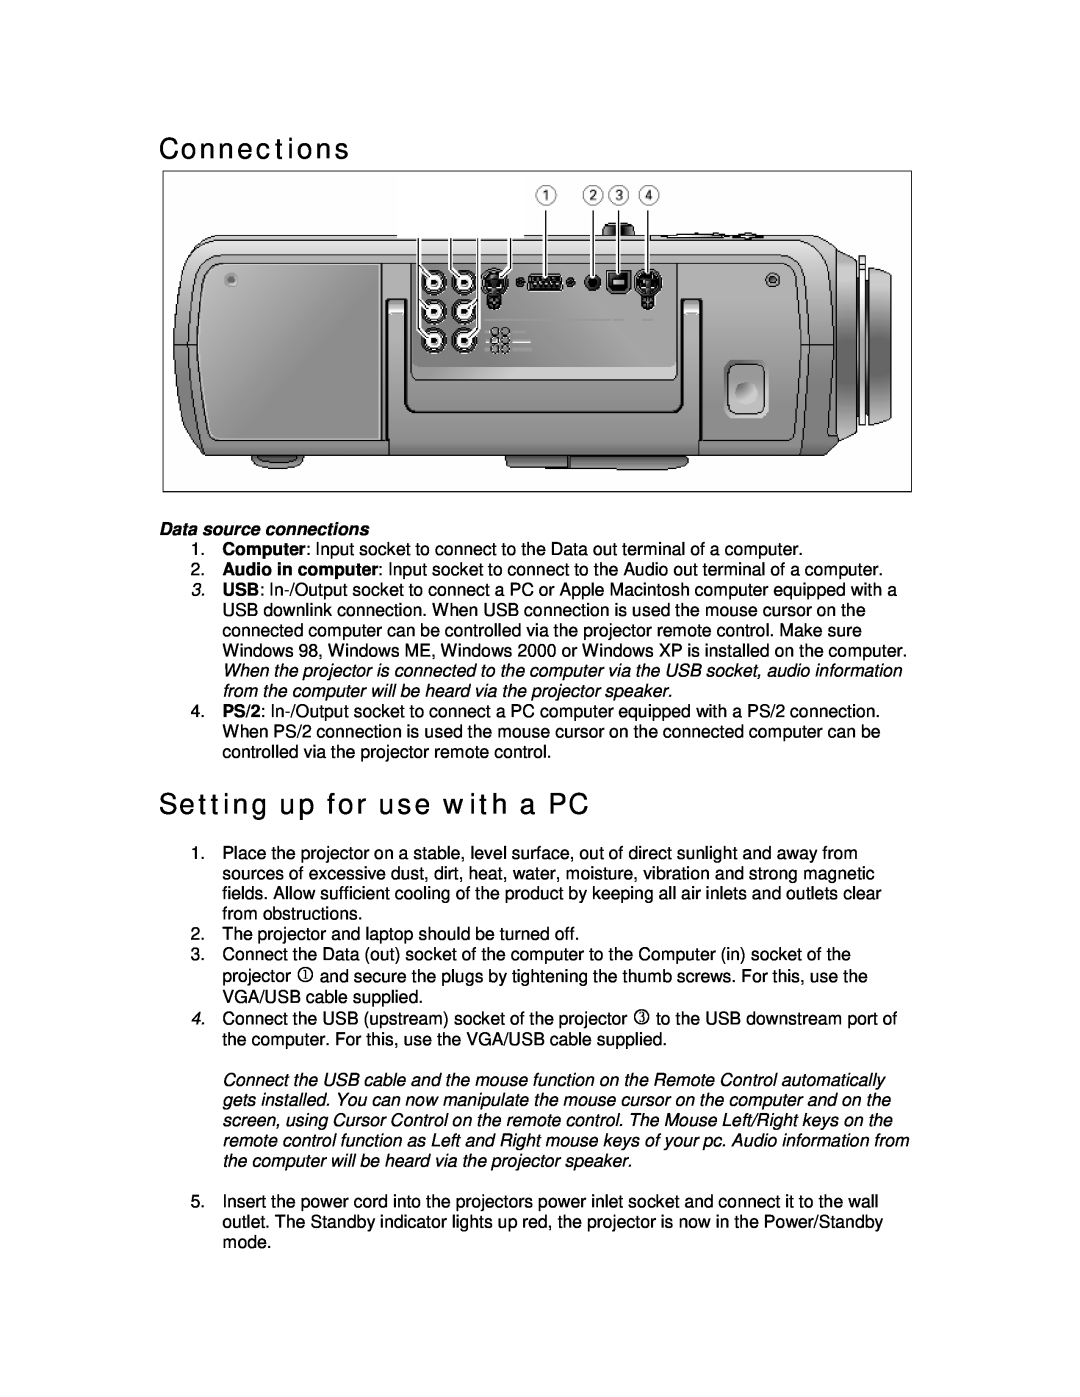 Philips bSure 2 manual Connections, Setting up for use with a PC, Data source connections 